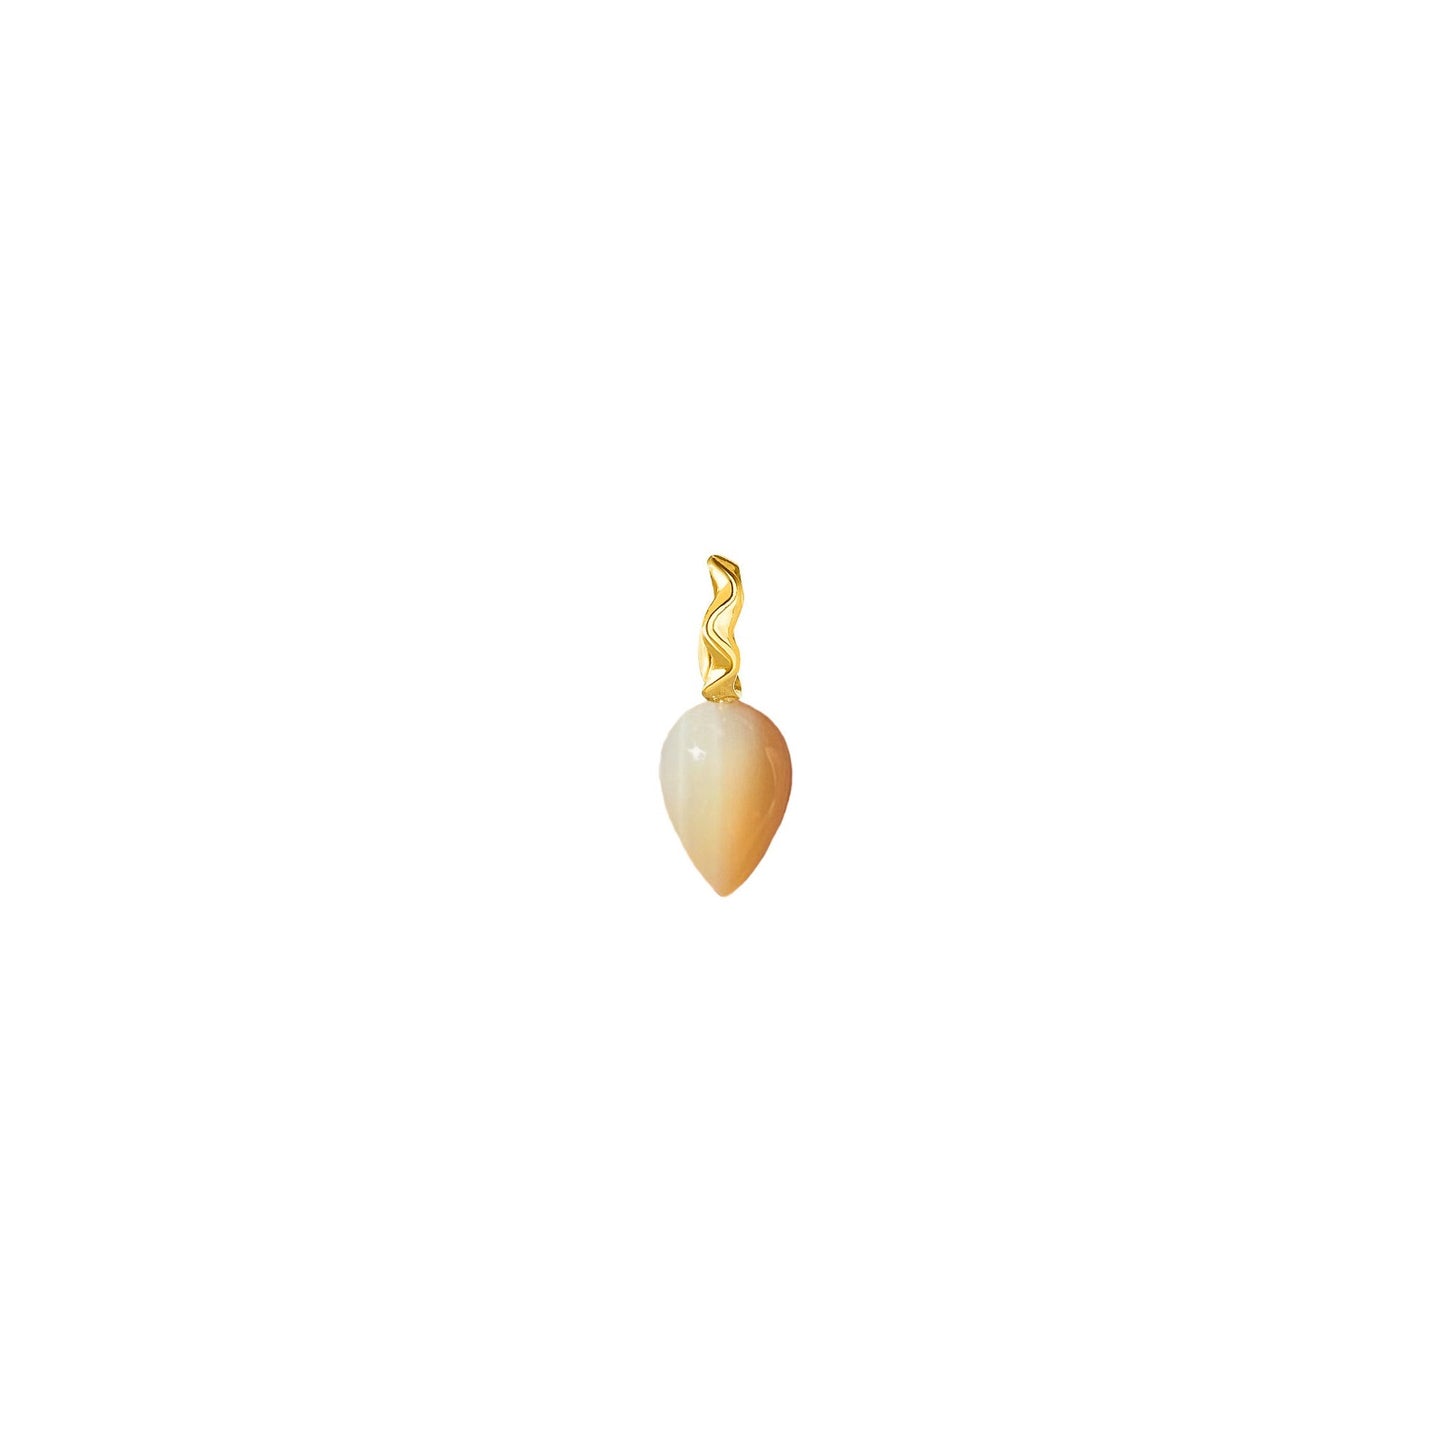 Mother of Pearl acorn drop charm with 14k gold bail